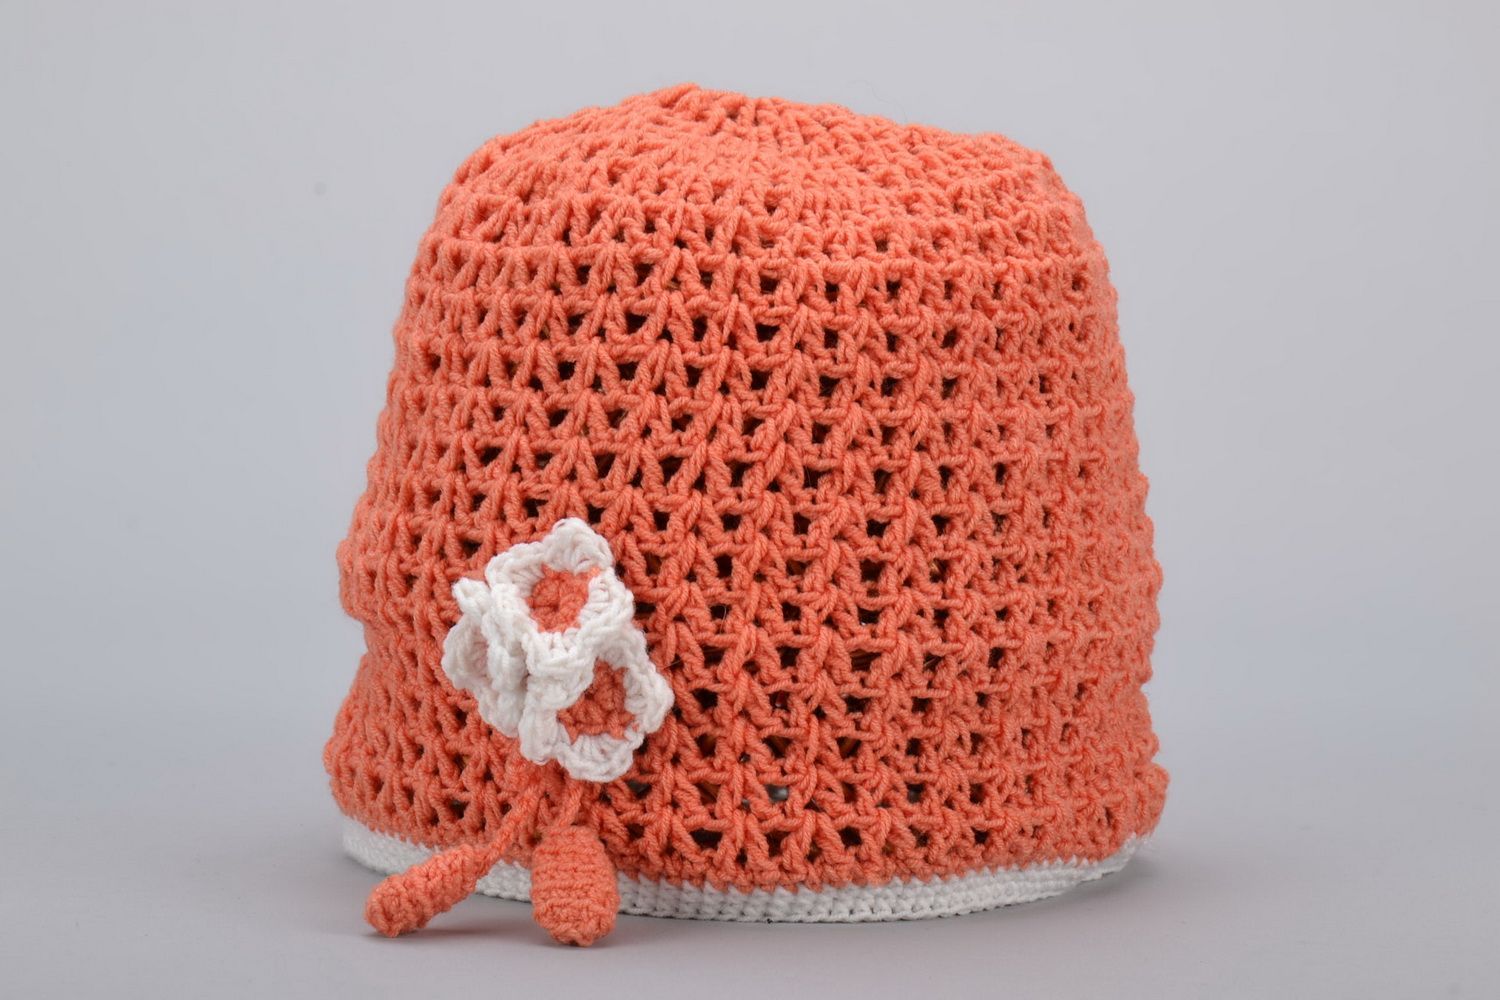 Hand crocheted hat of peach color   photo 2